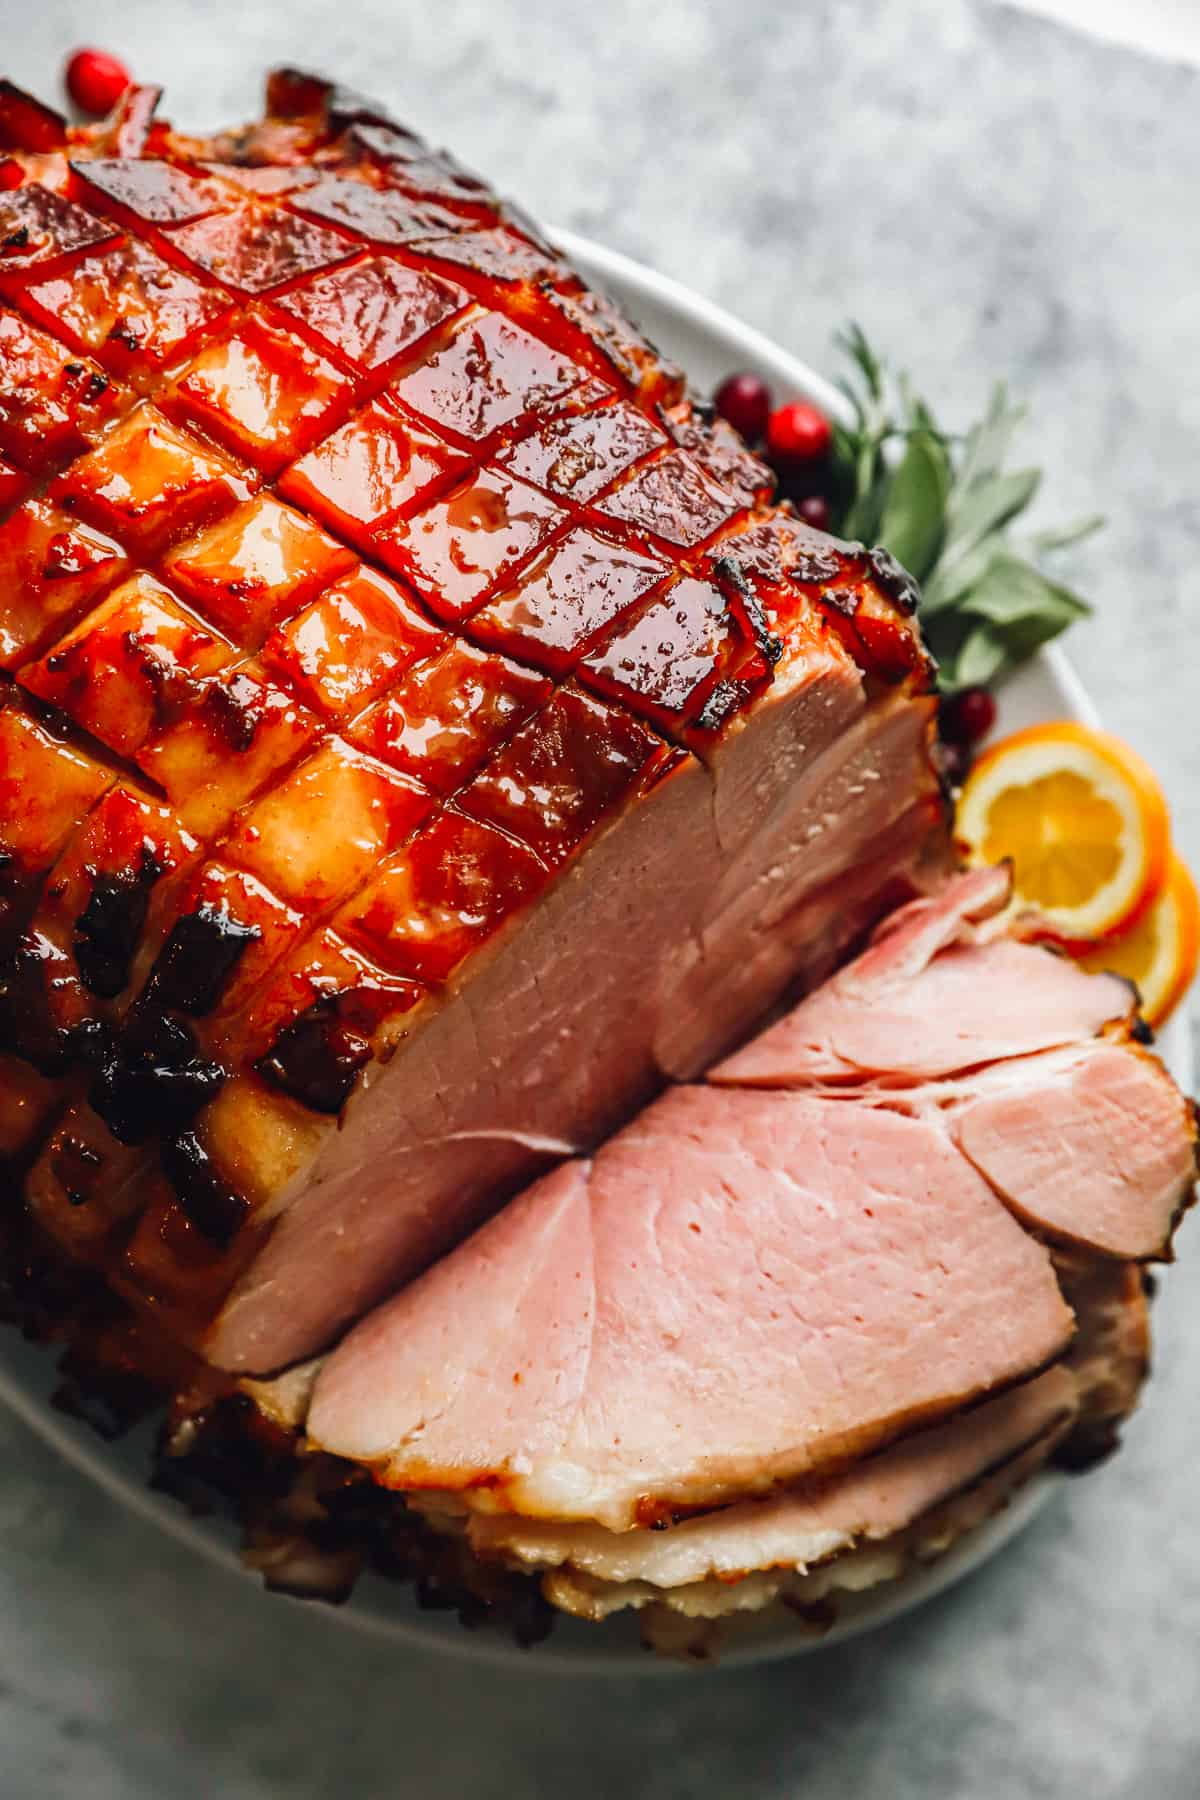 How to make glazed ham the day before